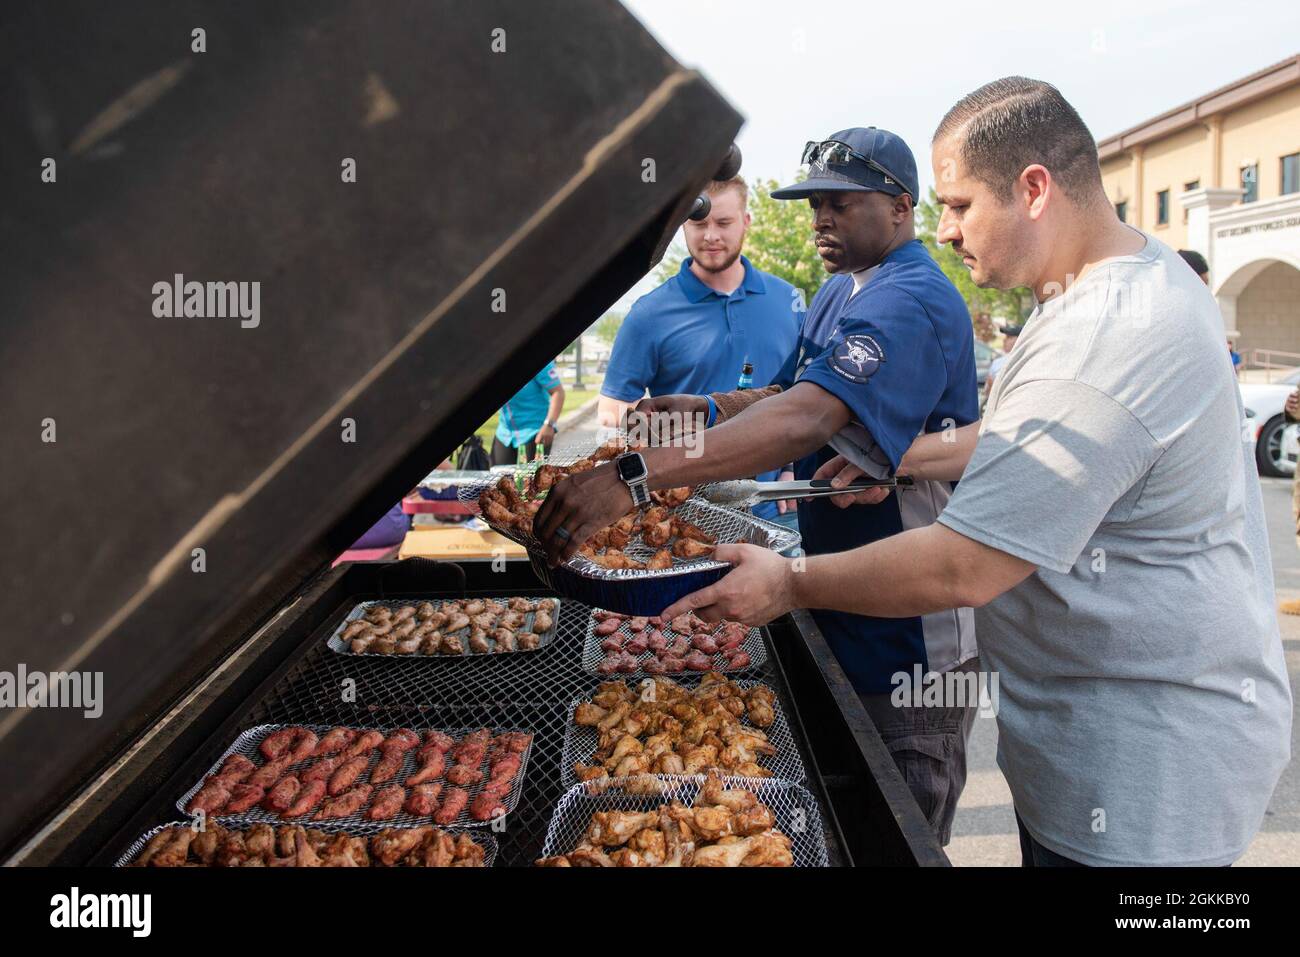 Tech. Sgt. Joe Perkins, 51st Security Forces Squadron contingency operations section chief, middle, and Master Sgt. Alejandrino Herrera, 51st SFS commander support staff superintendent, right, remove cooked meats from the grill during the Police Week Morale Cookout at Osan Air Base, Republic of Korea, May 13, 2021. The cookout was open to all base personnel and host nationals, and finished off the week full of events with an afternoon of morale building and relaxation. Stock Photo